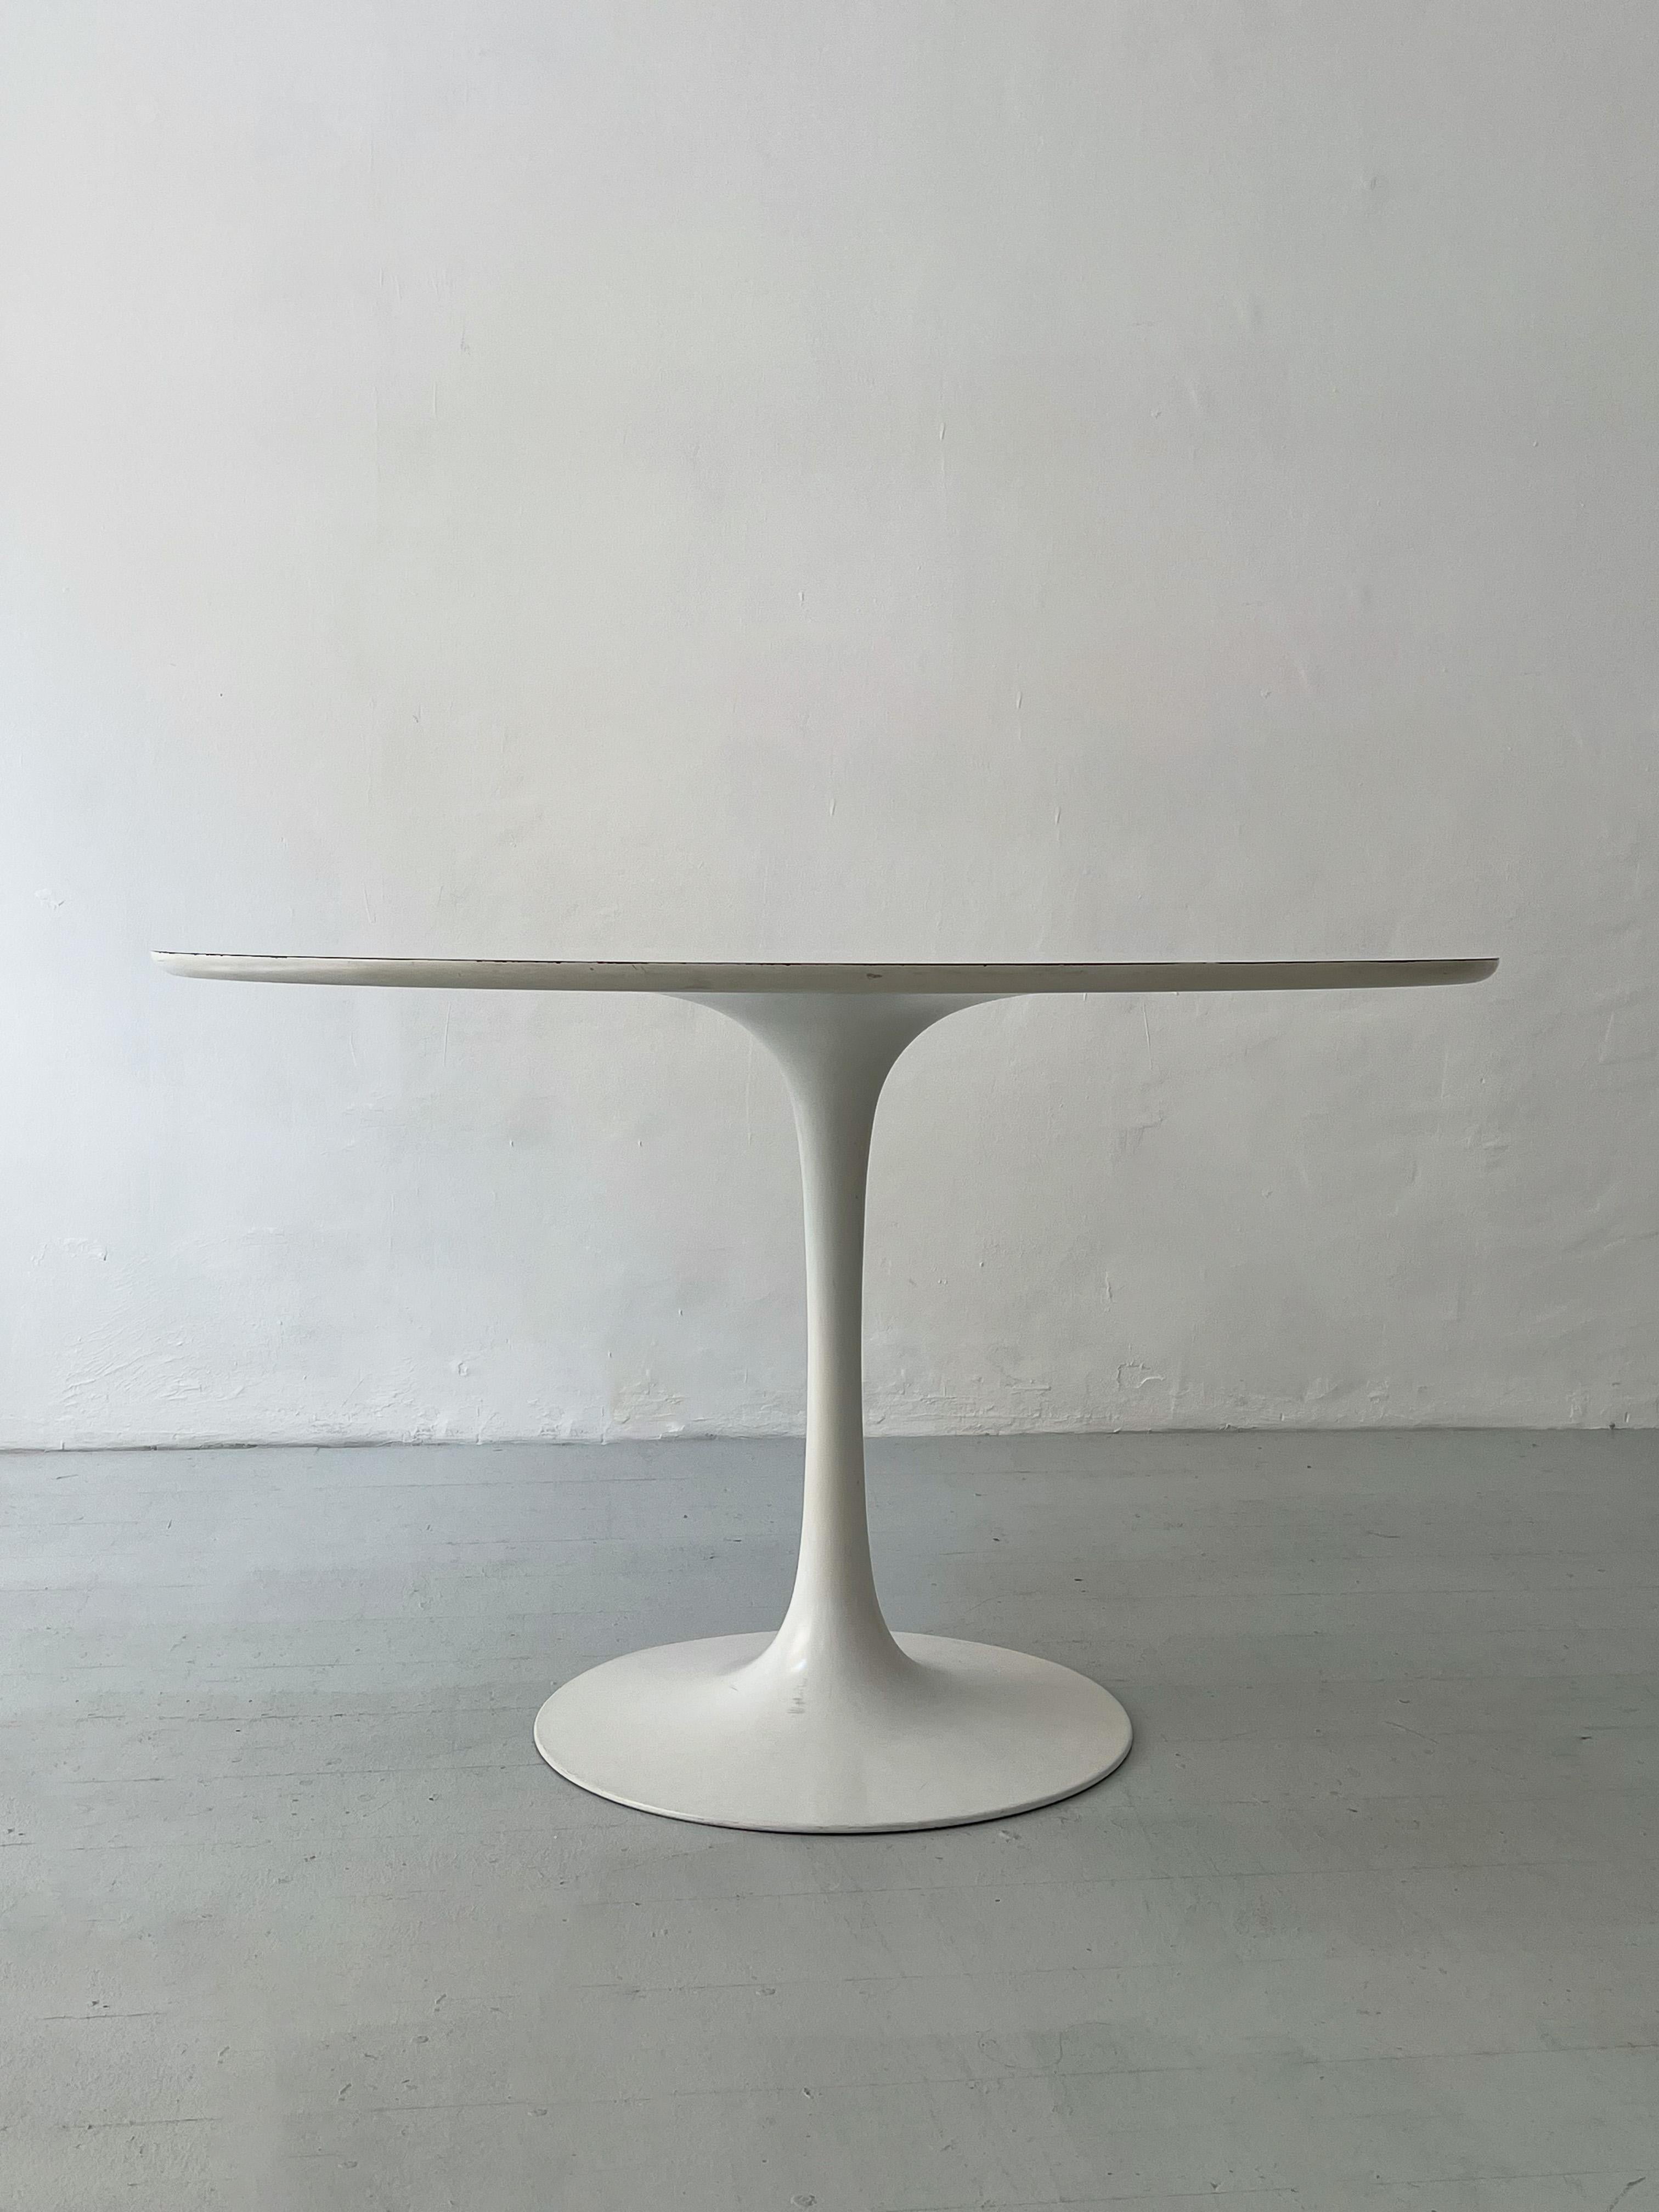 Inspired by Eero Saarinen's iconic design, the Tulip table crafted by Maurice Burke for Arkana in the 1960s is a testament to the enduring appeal of mid-century modern aesthetics. This particular piece showcases a circular top constructed from